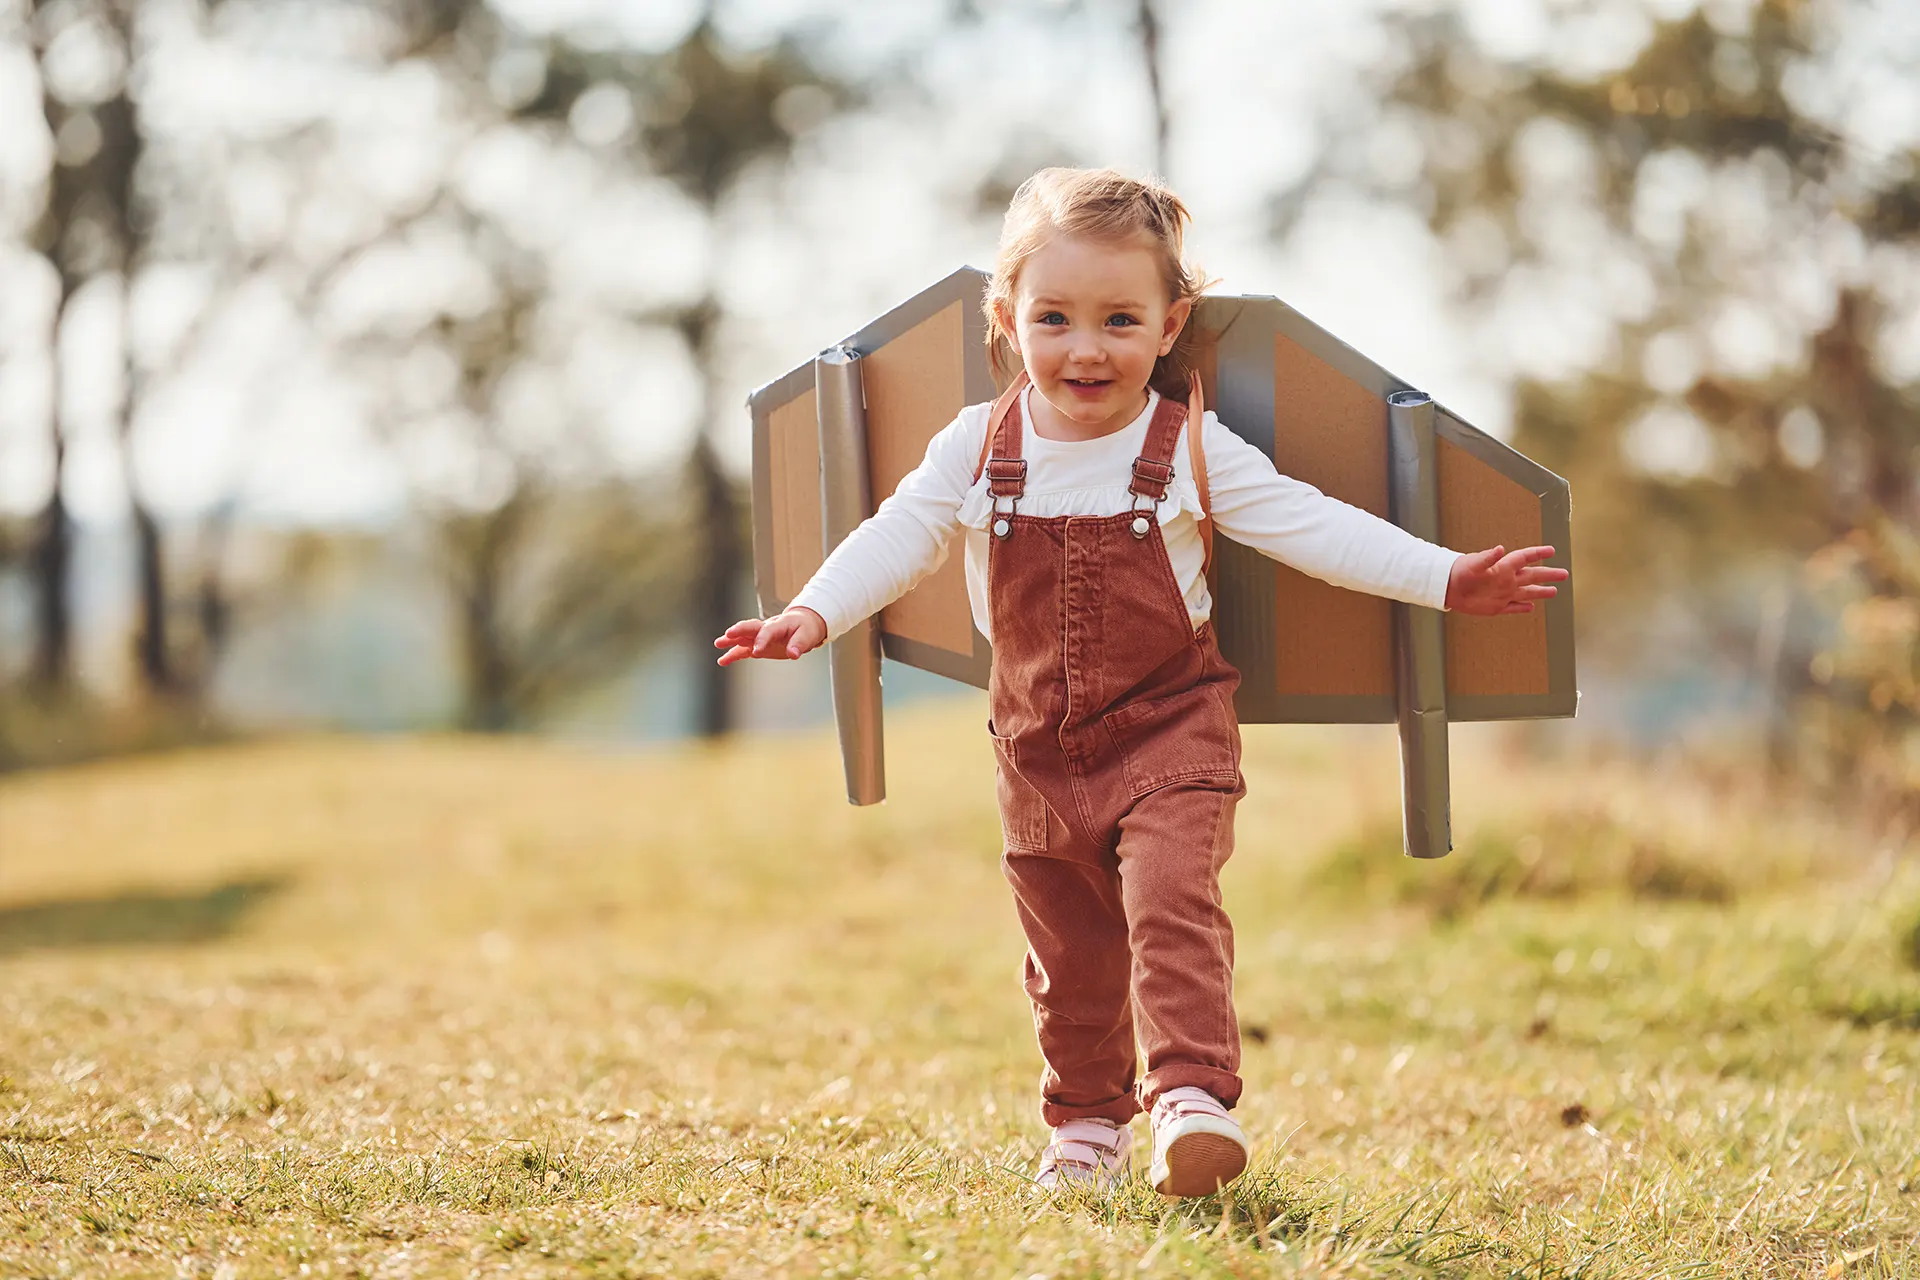 cute-little-girl-with-handmaded-wings-running-outdoors-field-having-fun copy